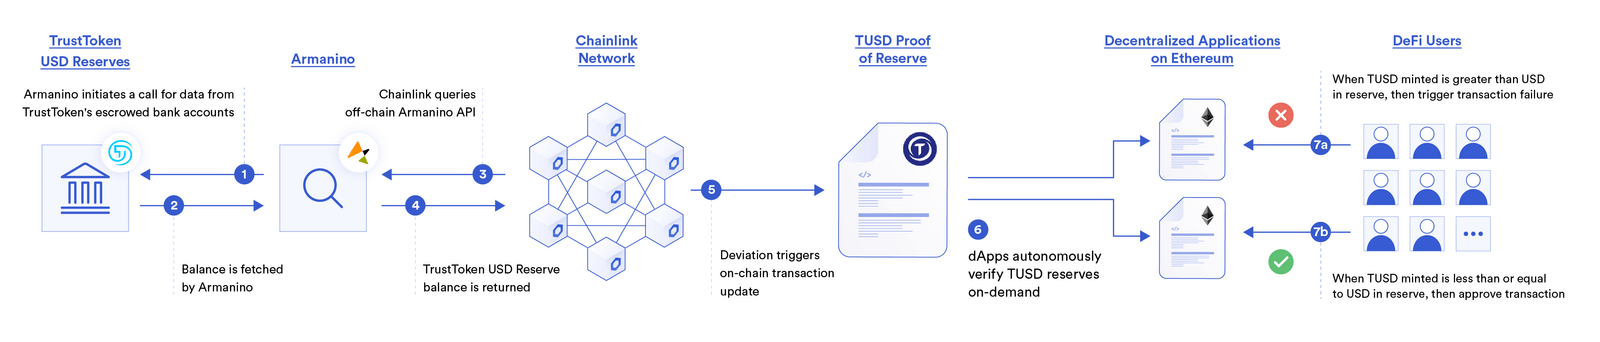 A diagram showing a Chainlink Proof of Reserve data feed for TUSD.